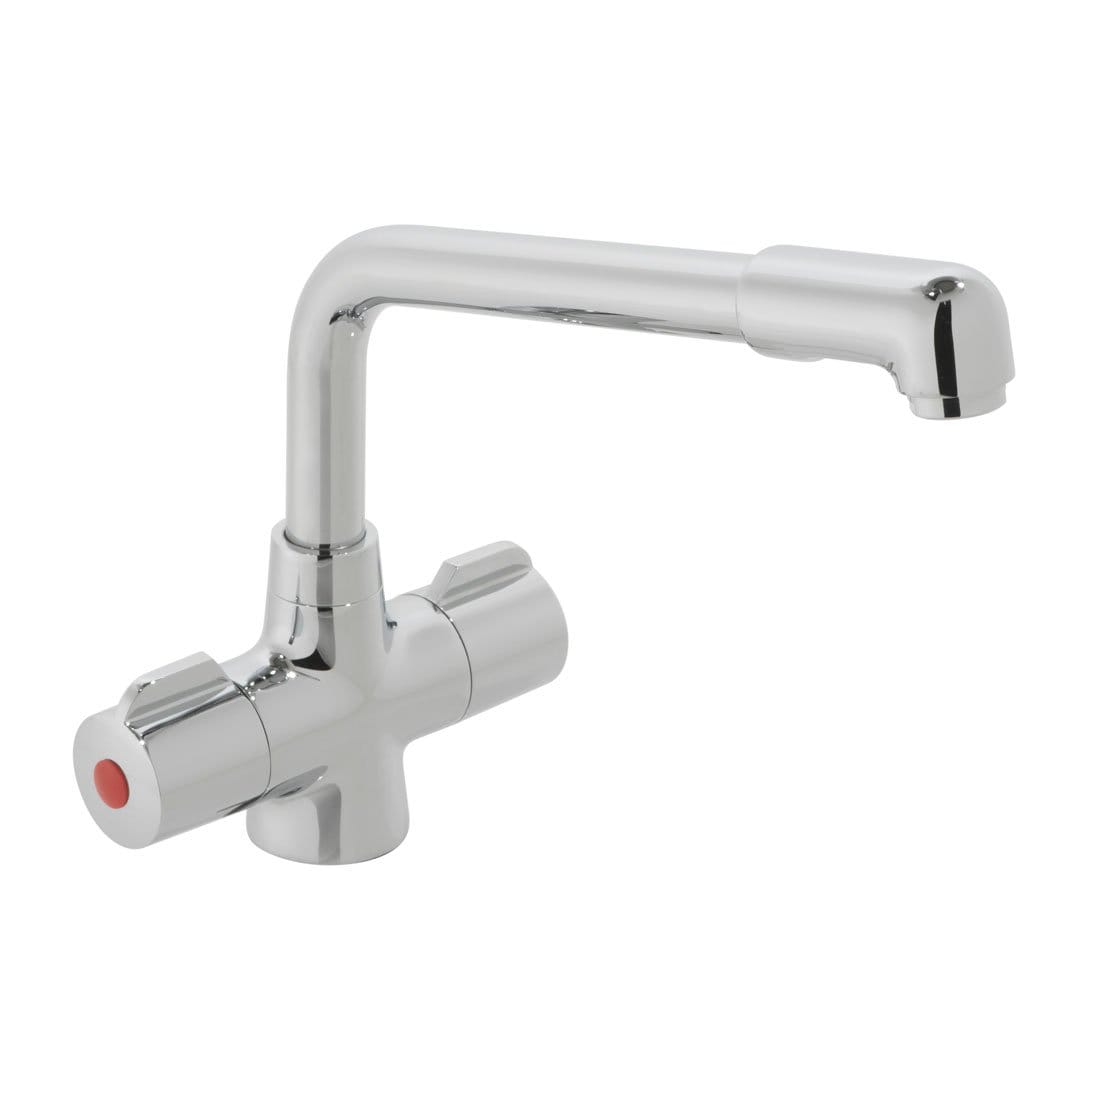 Vado Base Mono Sink Mixer With Swivel Spout - AX-CUC-1050-CP | Supply Master | Accra, Ghana Building Material Building Steel Engineering Hardware tool